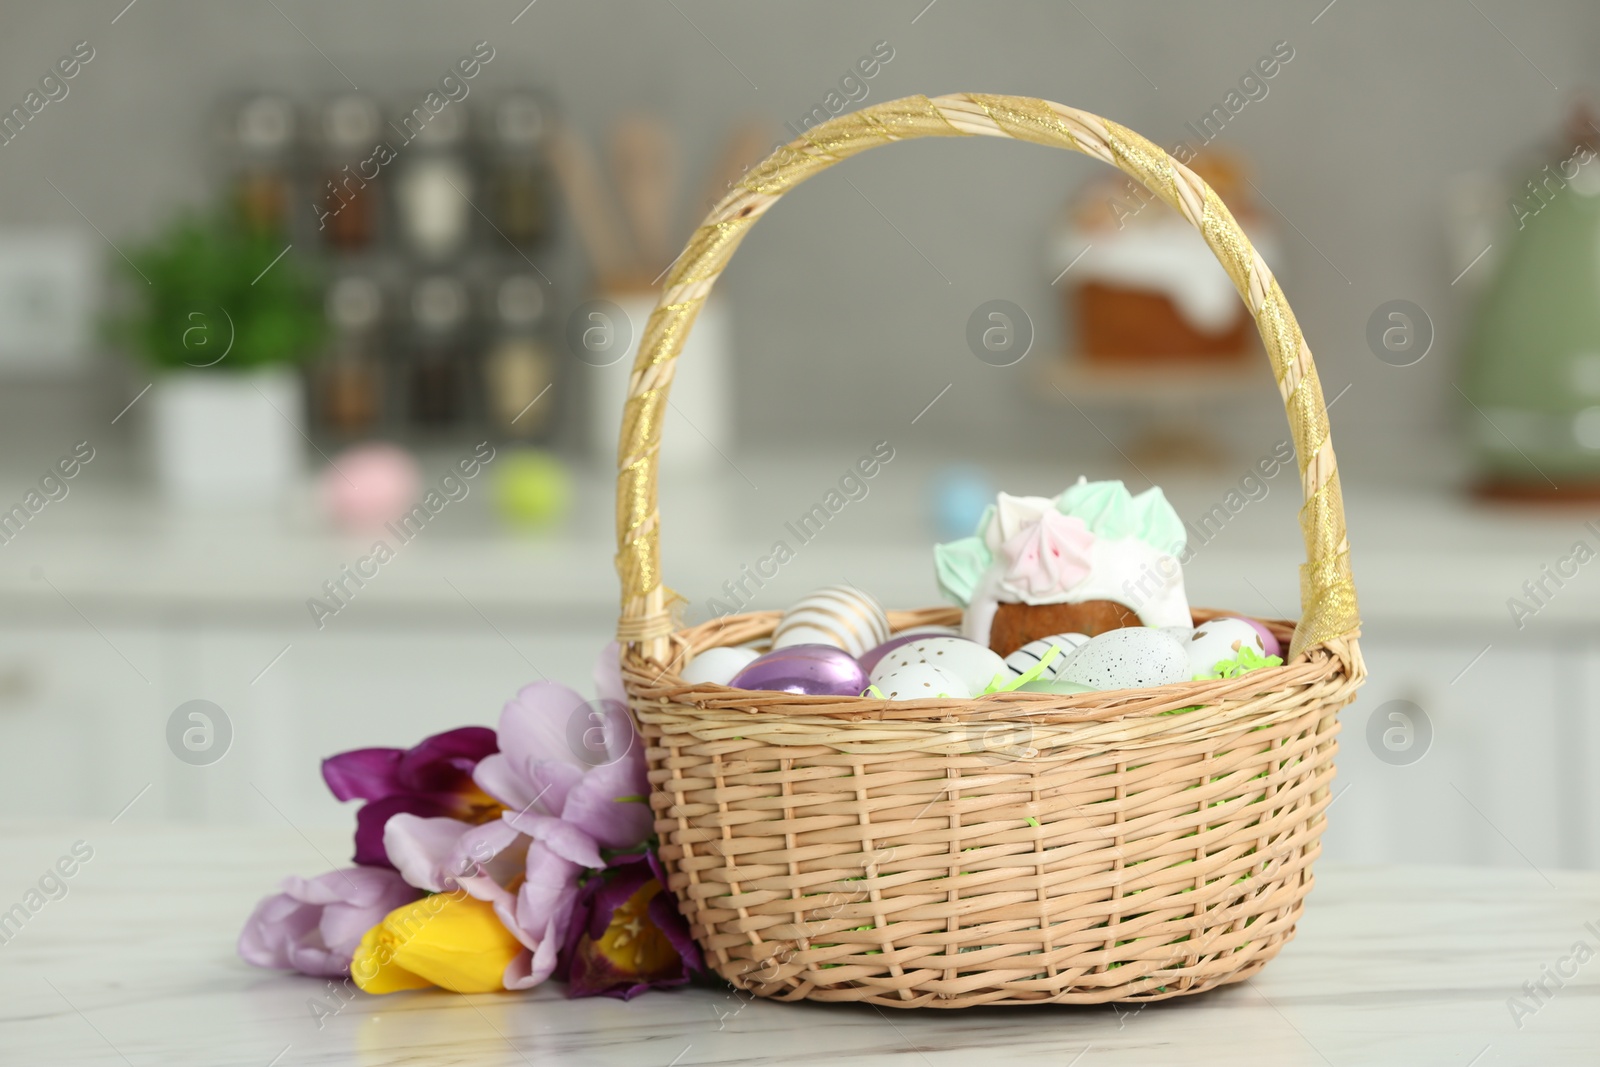 Photo of Wicker basket with painted eggs and delicious Easter cake near tulips on white marble table indoors